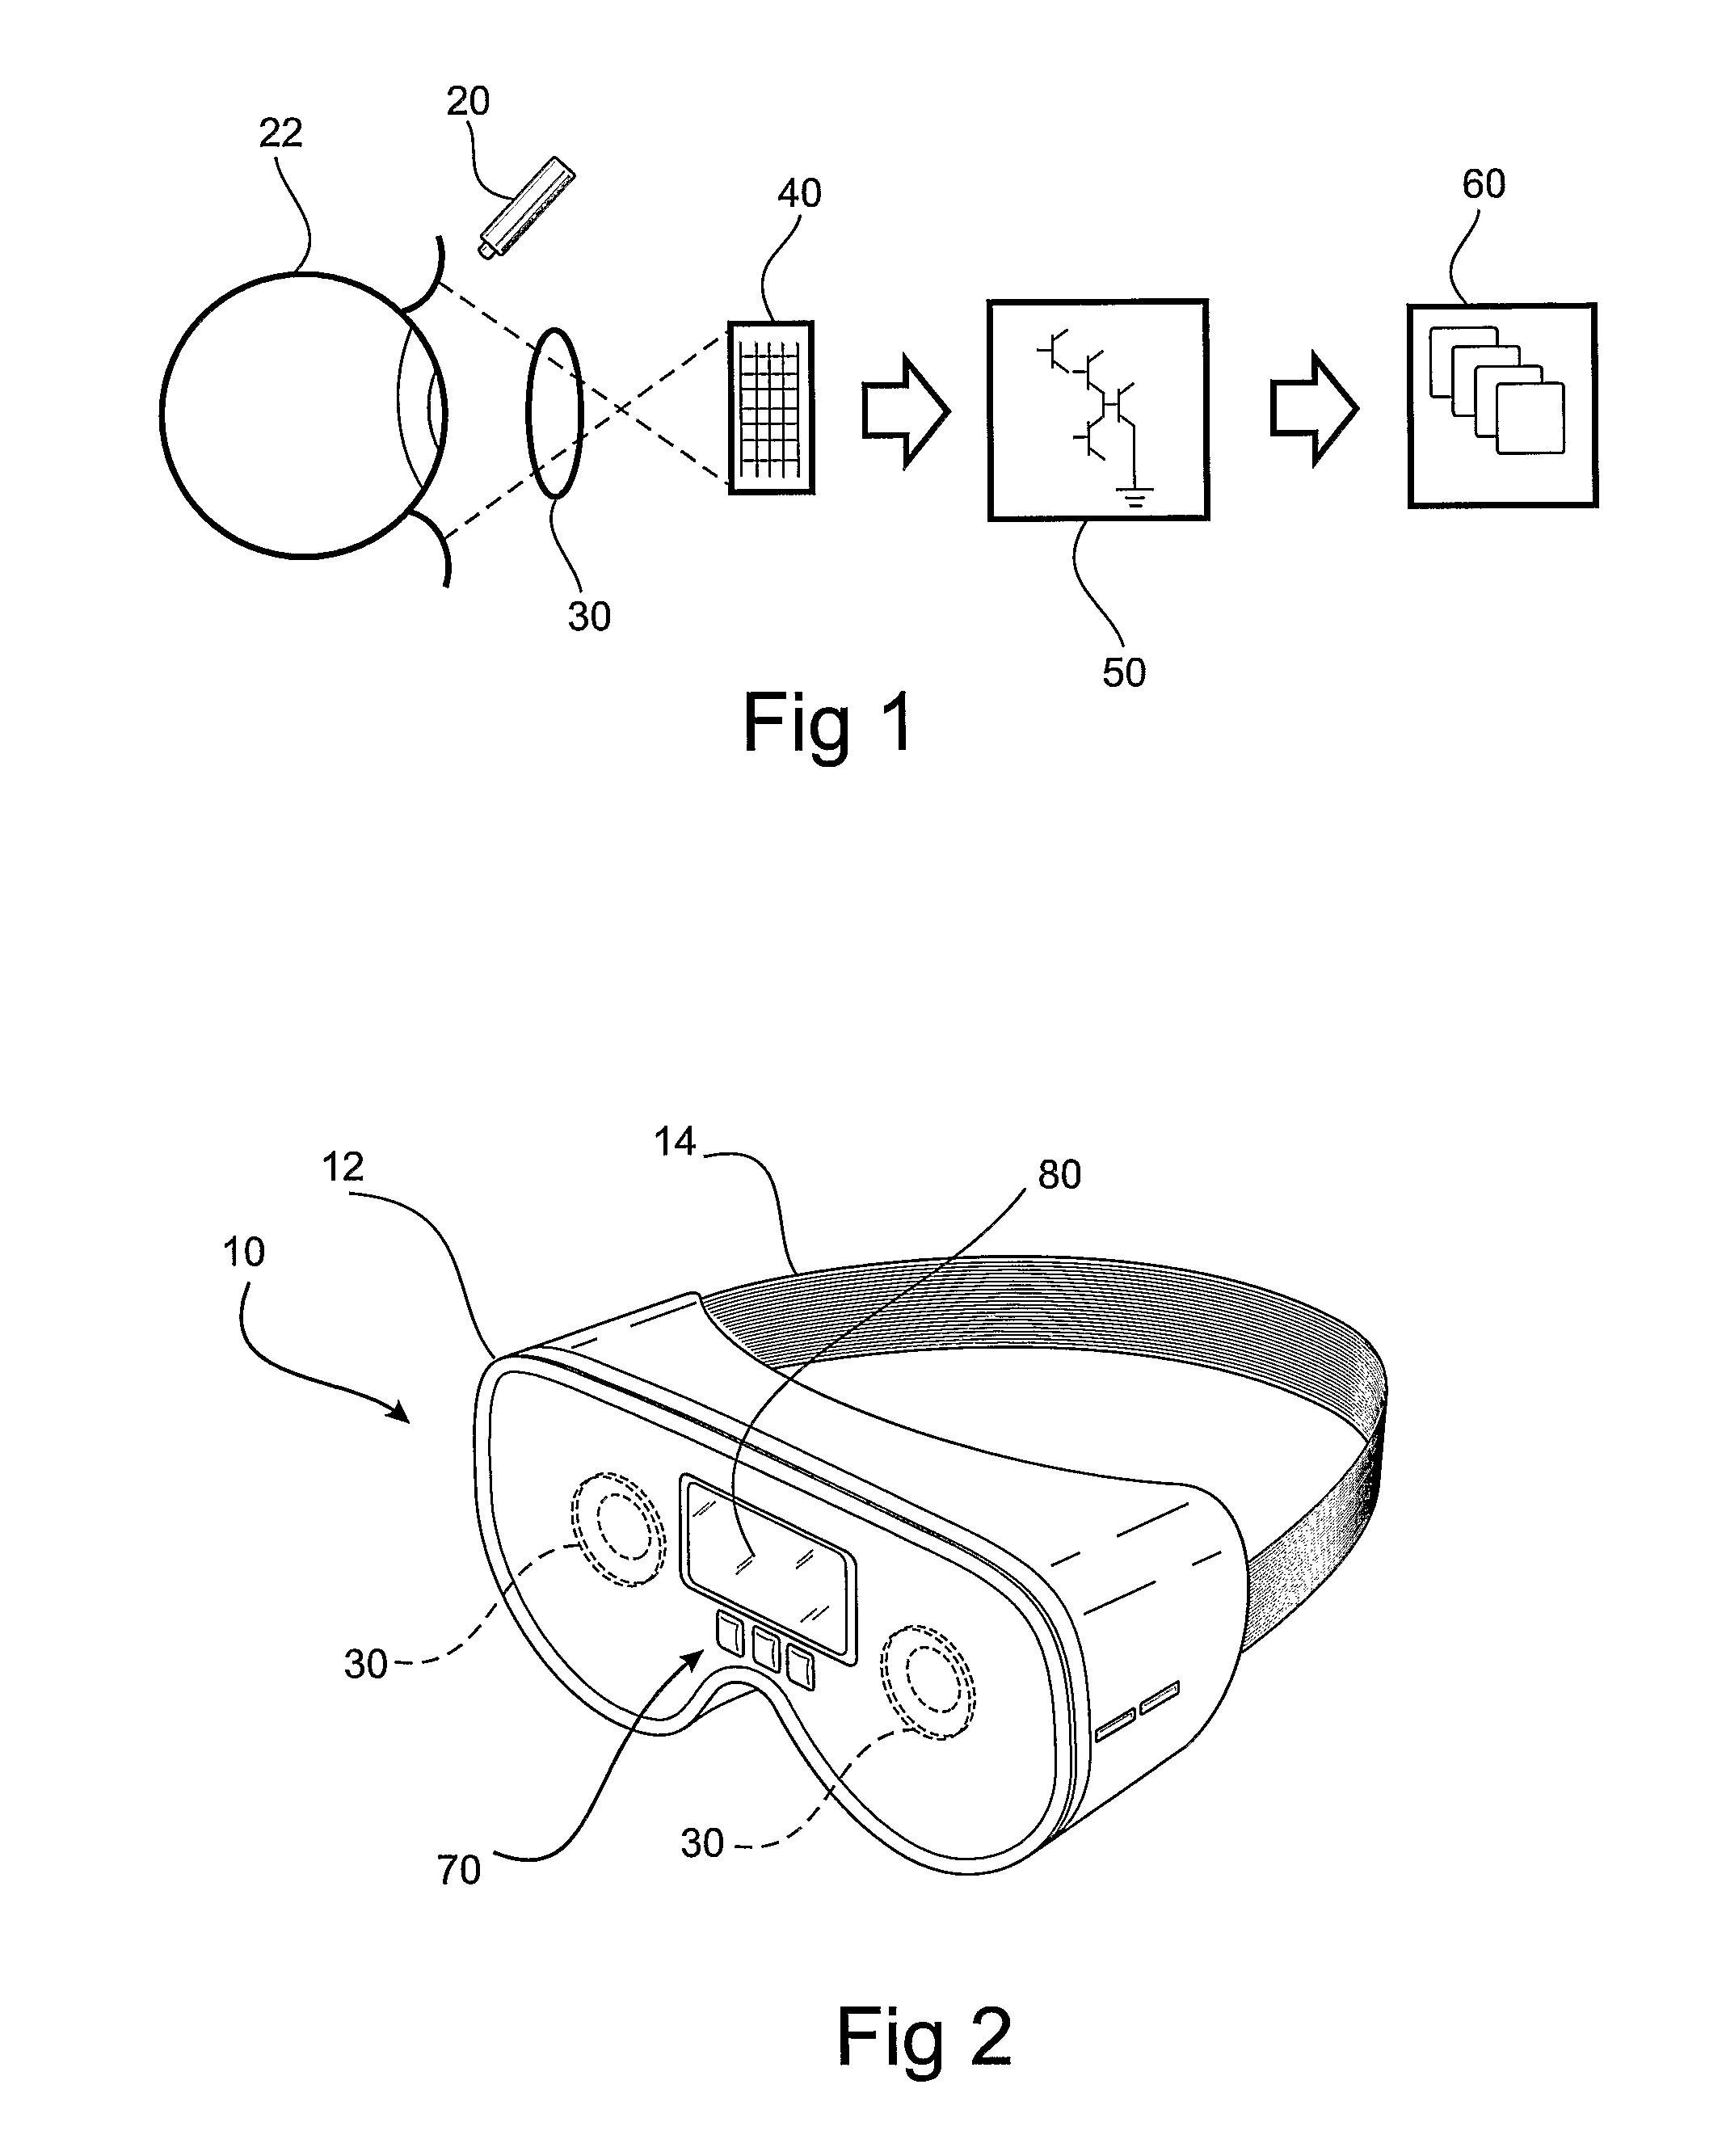 Device and Method for Investigating Changes in the Eye